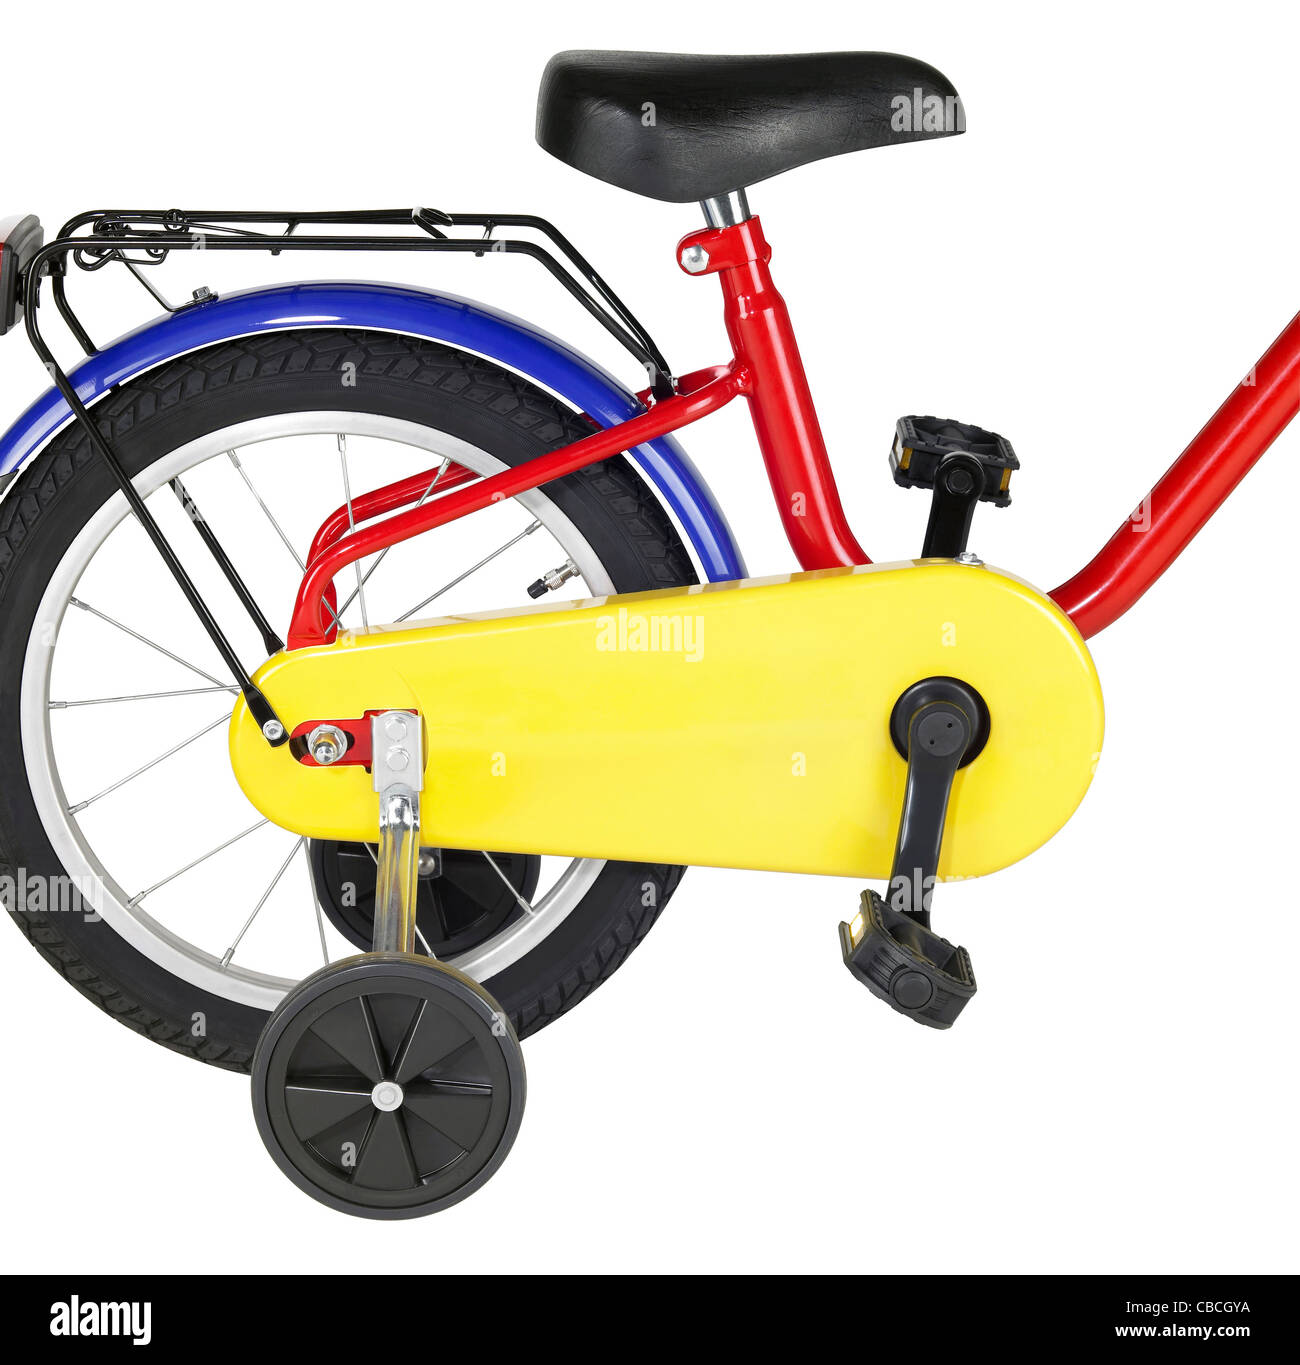 studio photography showing the detail of a colorful yuvenile bicycle in white back Stock Photo